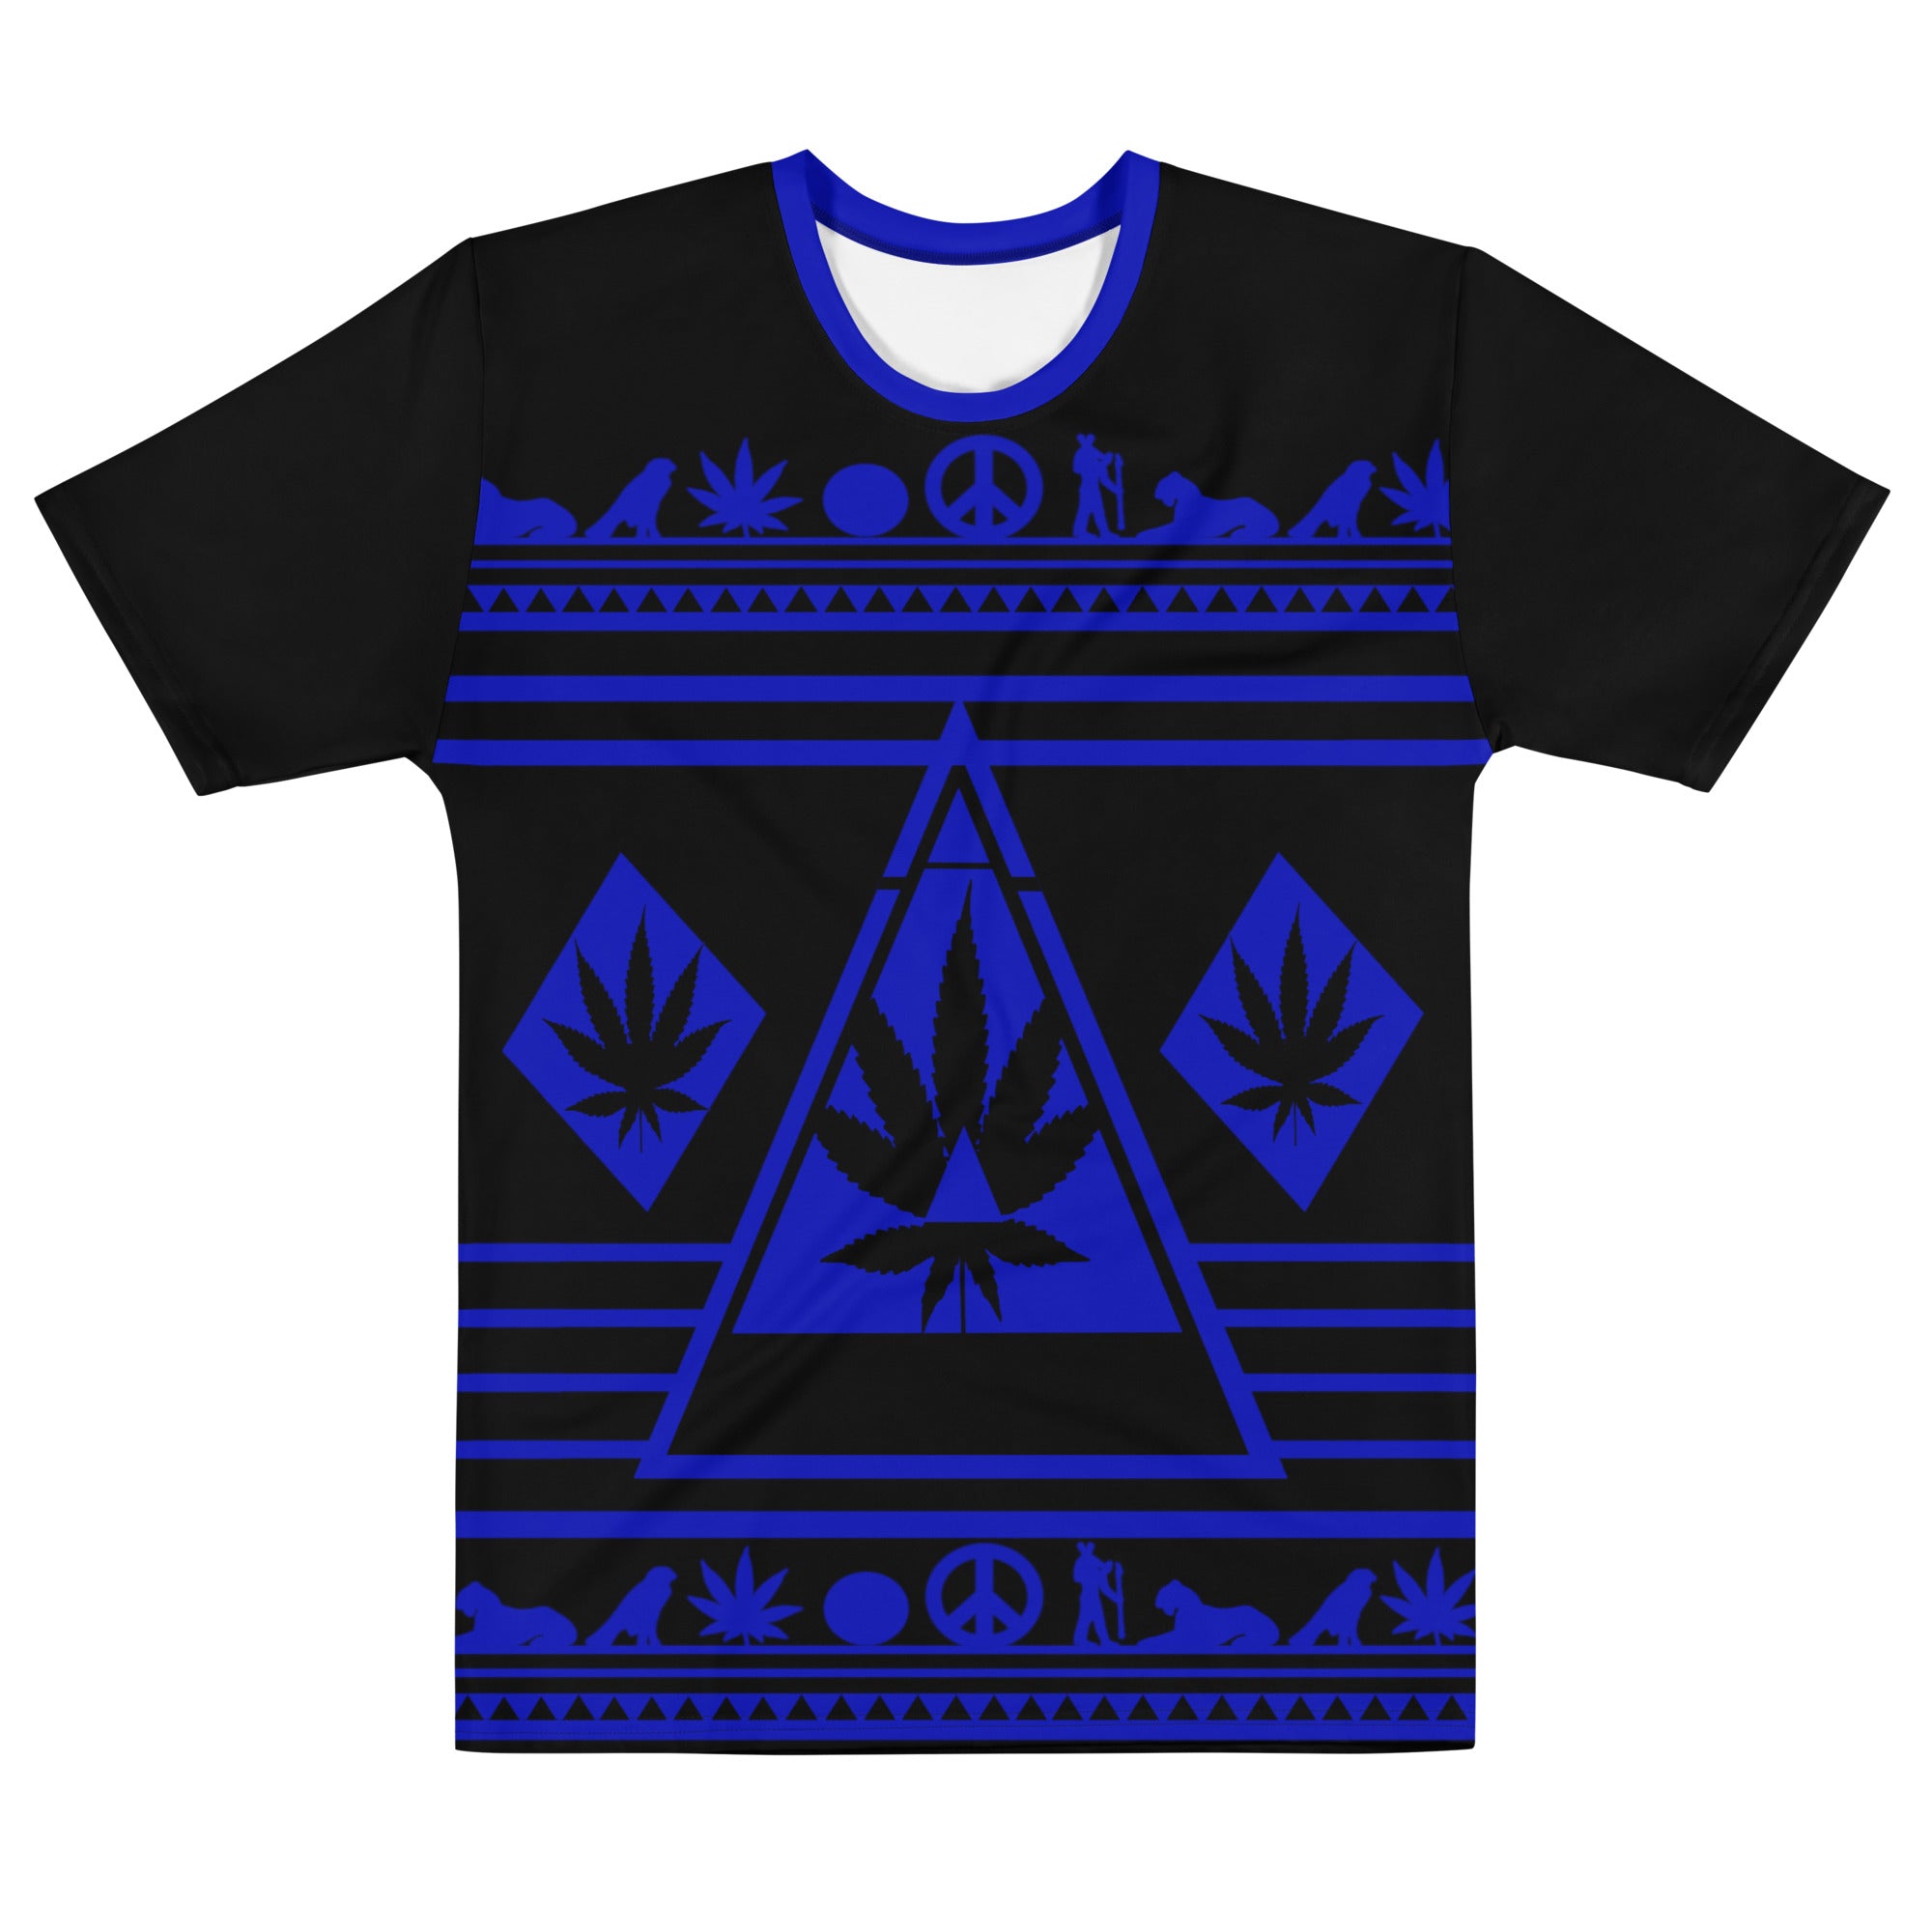 Navy Dreams: Dive into 420 Style with Our Navy Blue Graphic Tee!